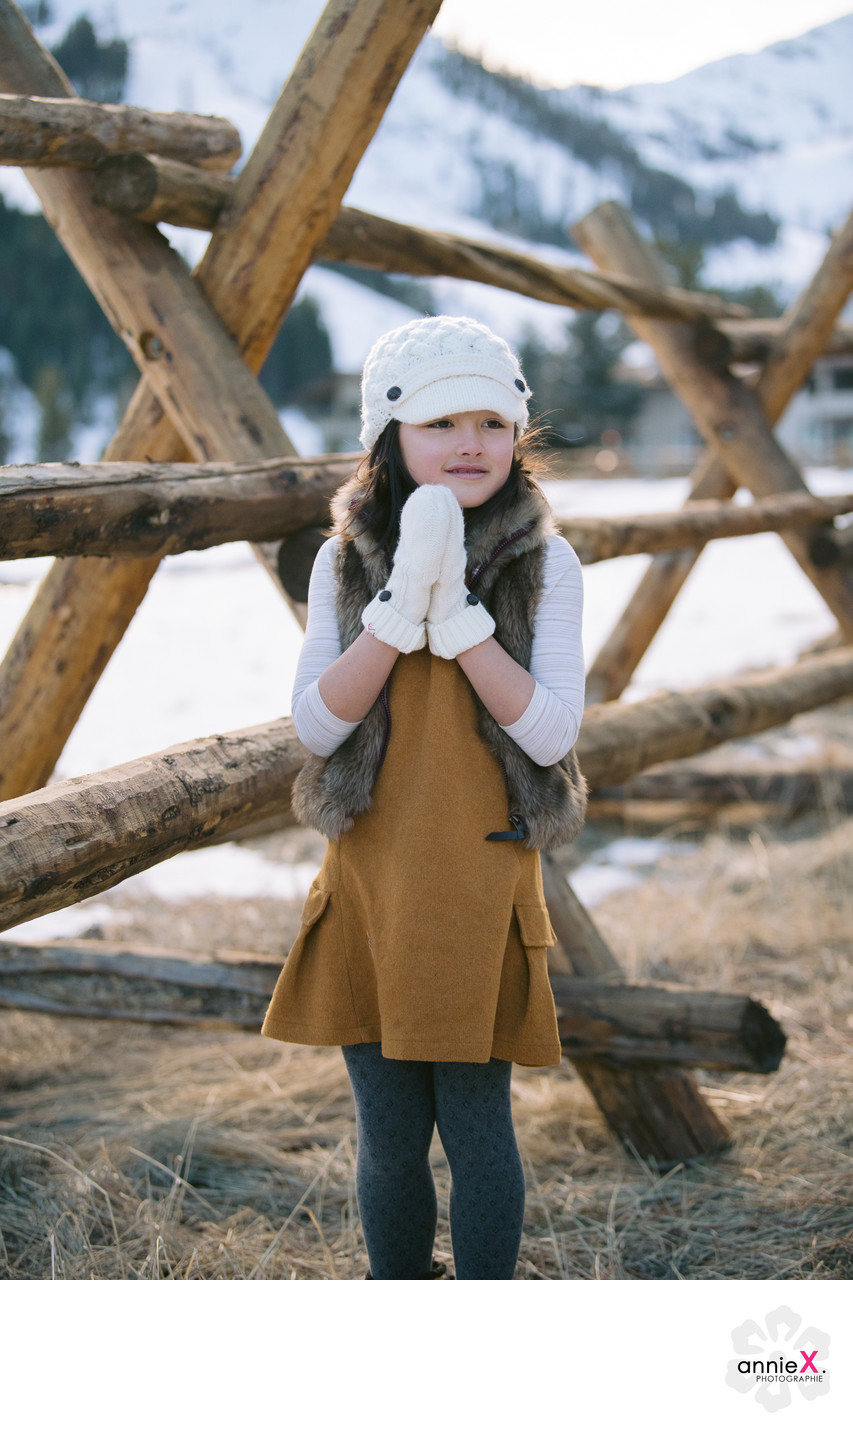 Professional Child Photographer in Squaw Valley
